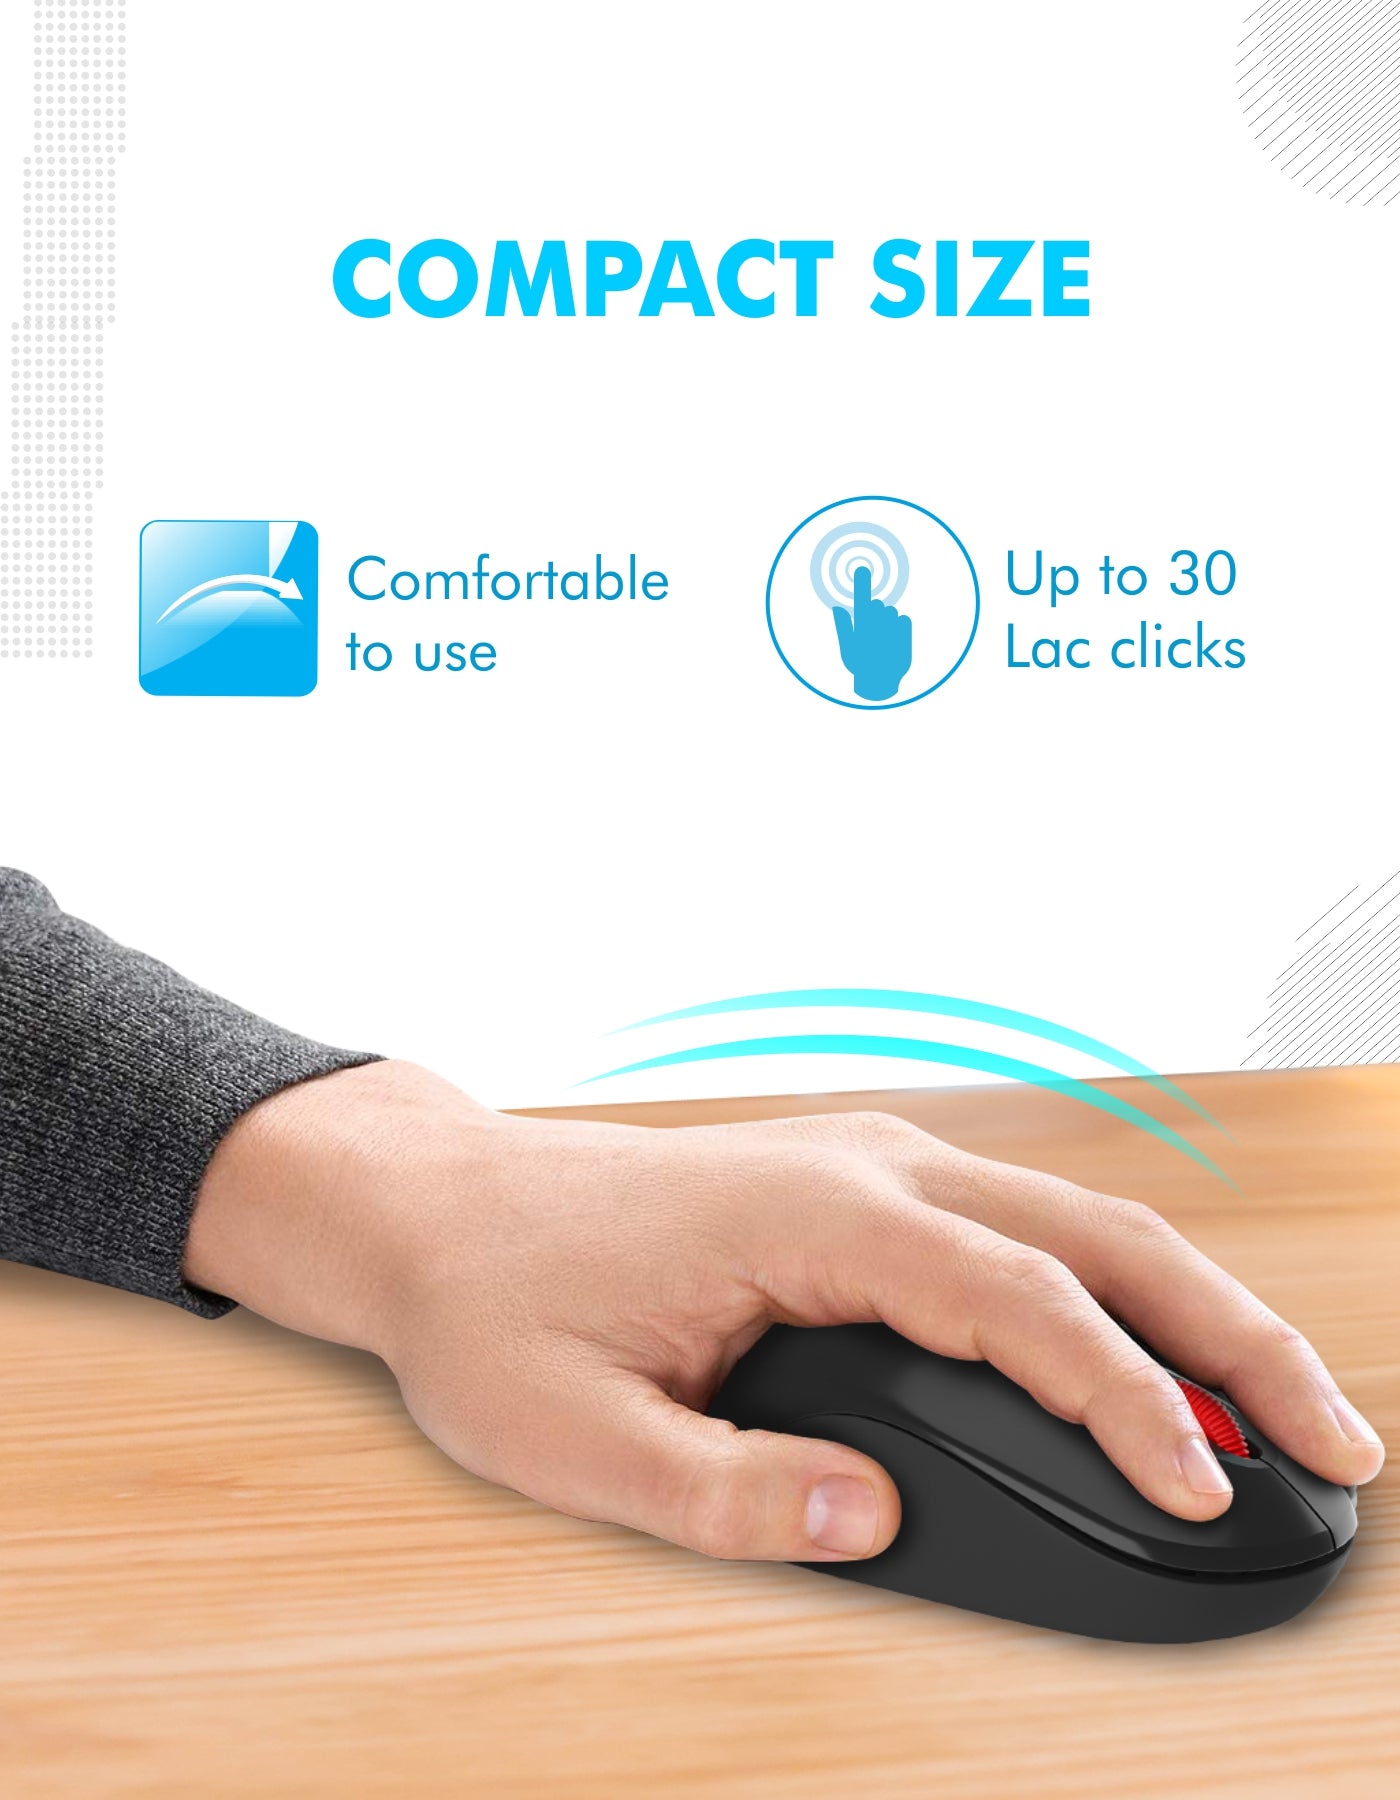 Portronics Toad 12 Rs 349 price of Wireless Mouse compact 